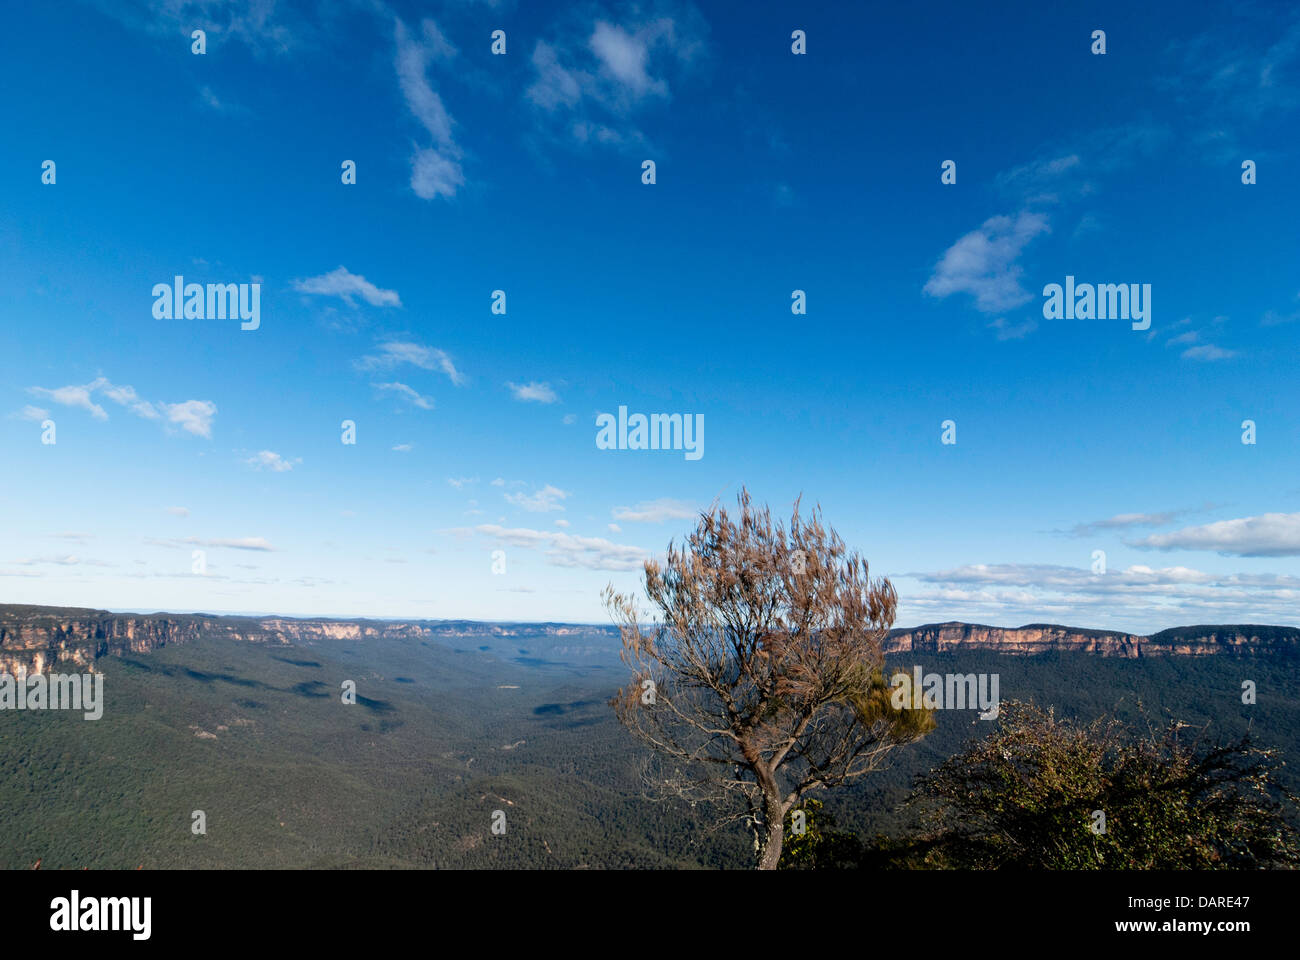 A native tree with views over the Jamison Valley, at Sublime Point, Blue Mountains, Australia Stock Photo